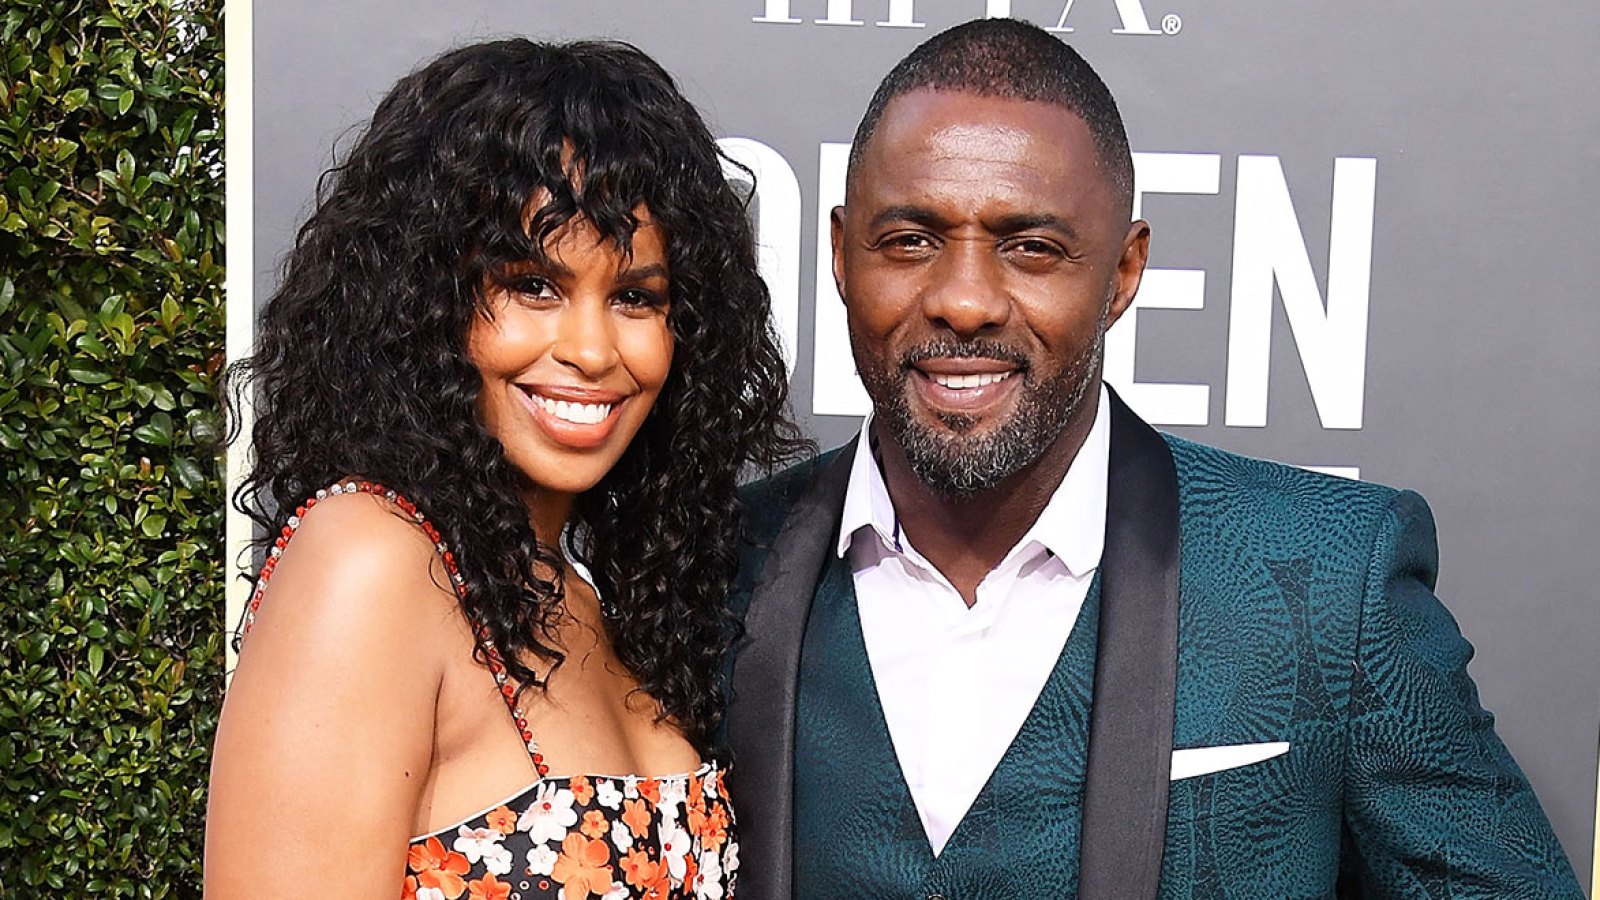 The Look of Love: These Are the Exact Products Idris Elba's Bride Used for Her Wedding Makeup